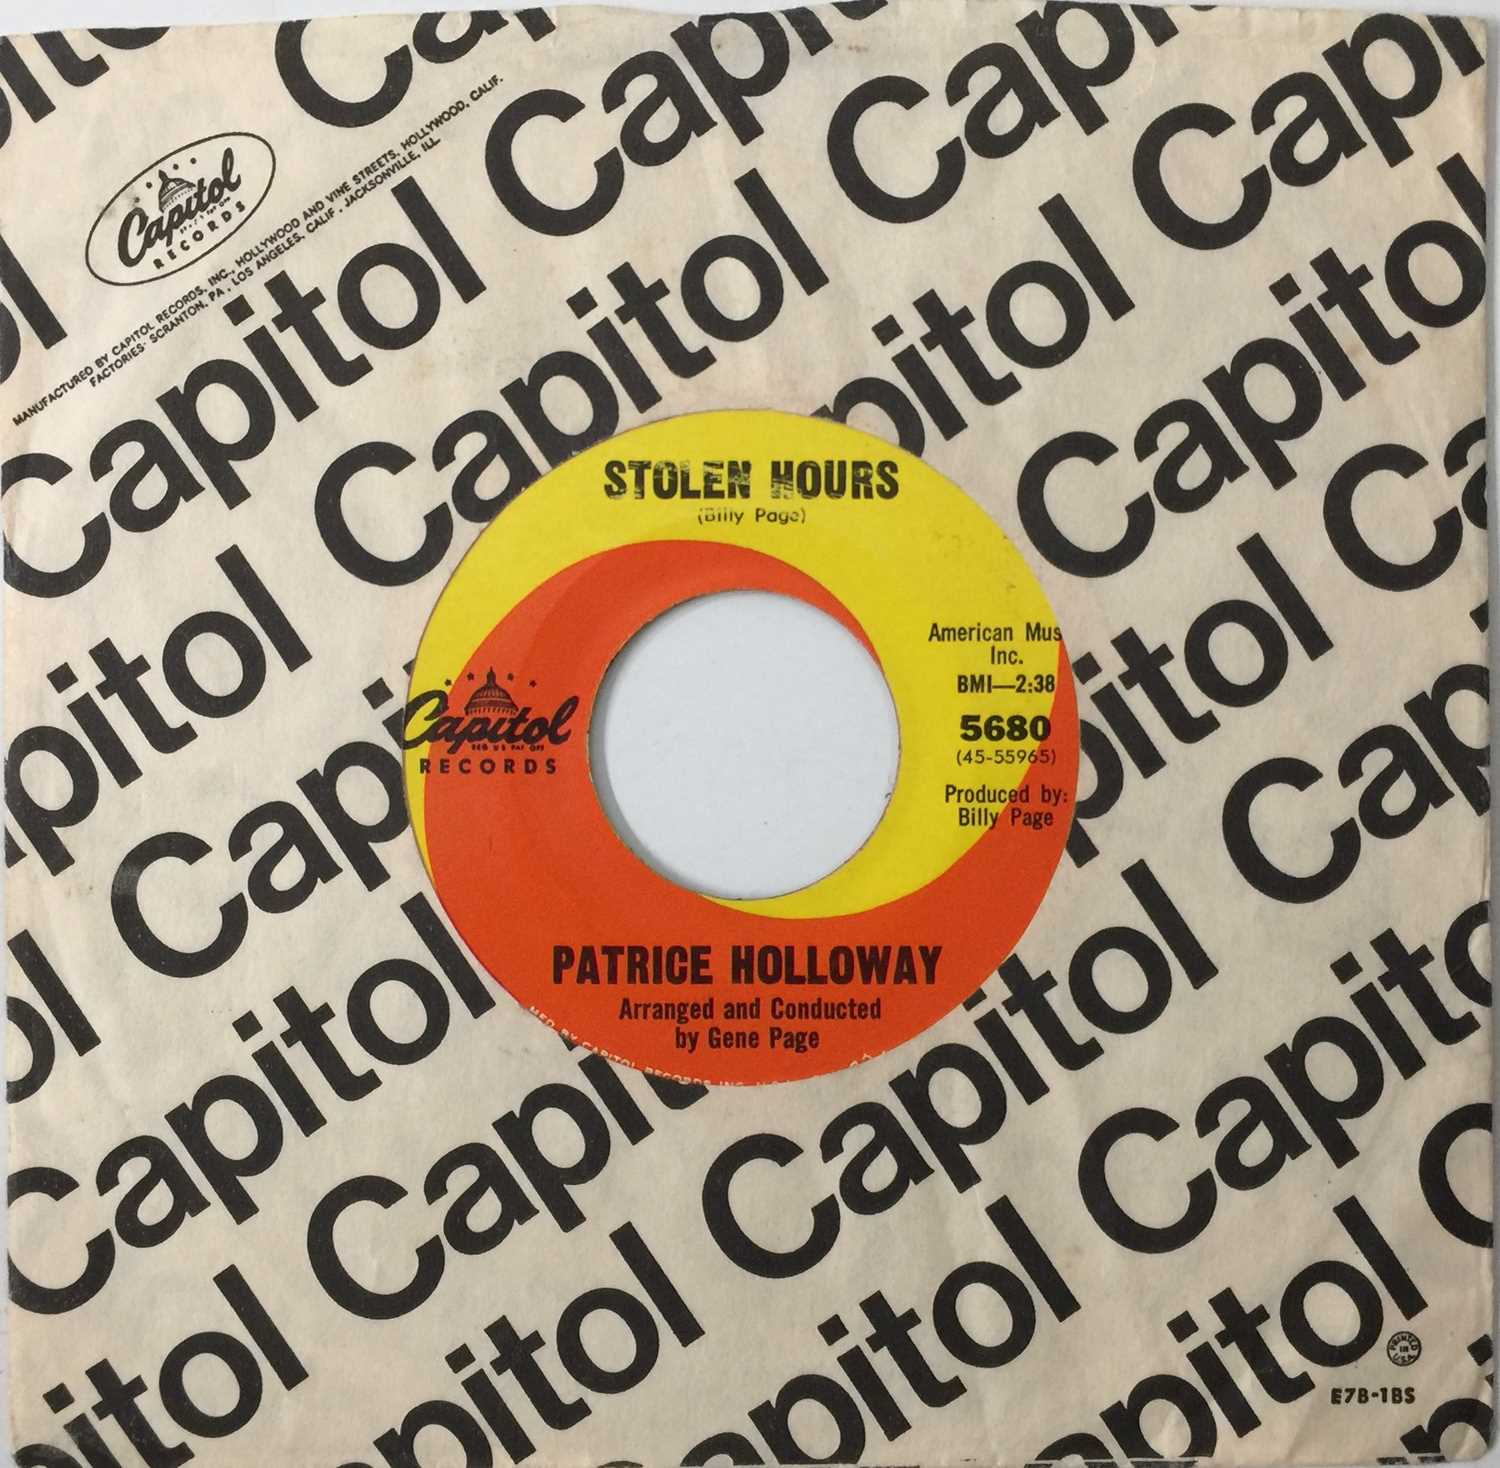 Lot 220 - PATRICE HOLLOWAY - STOLEN HOURS 7" (CAPITOL RECORDS 5680)